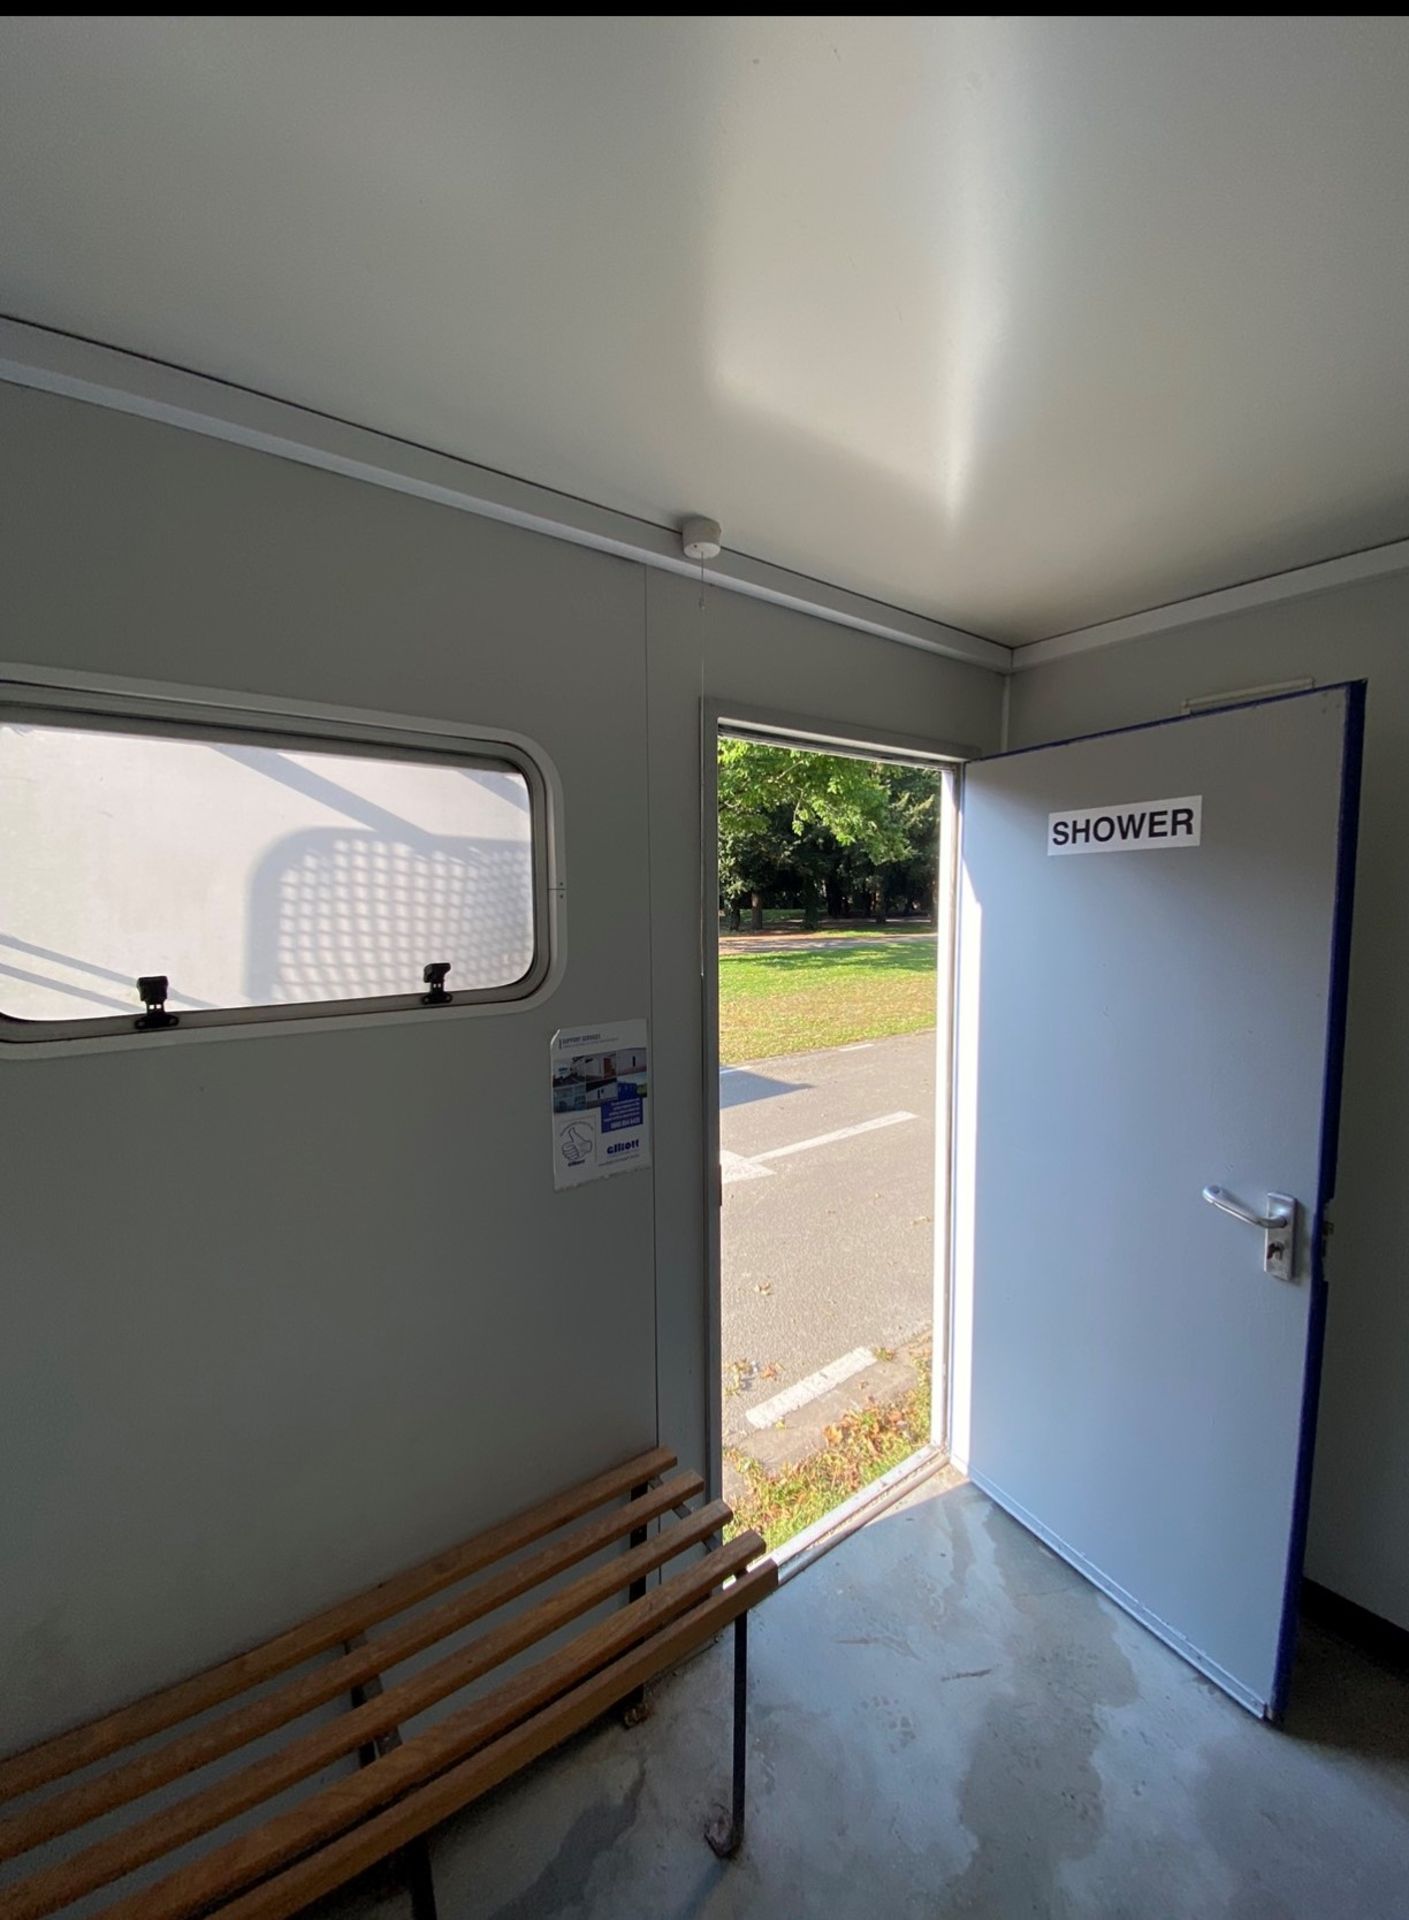 8ft x 8ft twin shower unit cabin with changing area, welfare unit, site cabin, wc block Comes with - Image 8 of 8